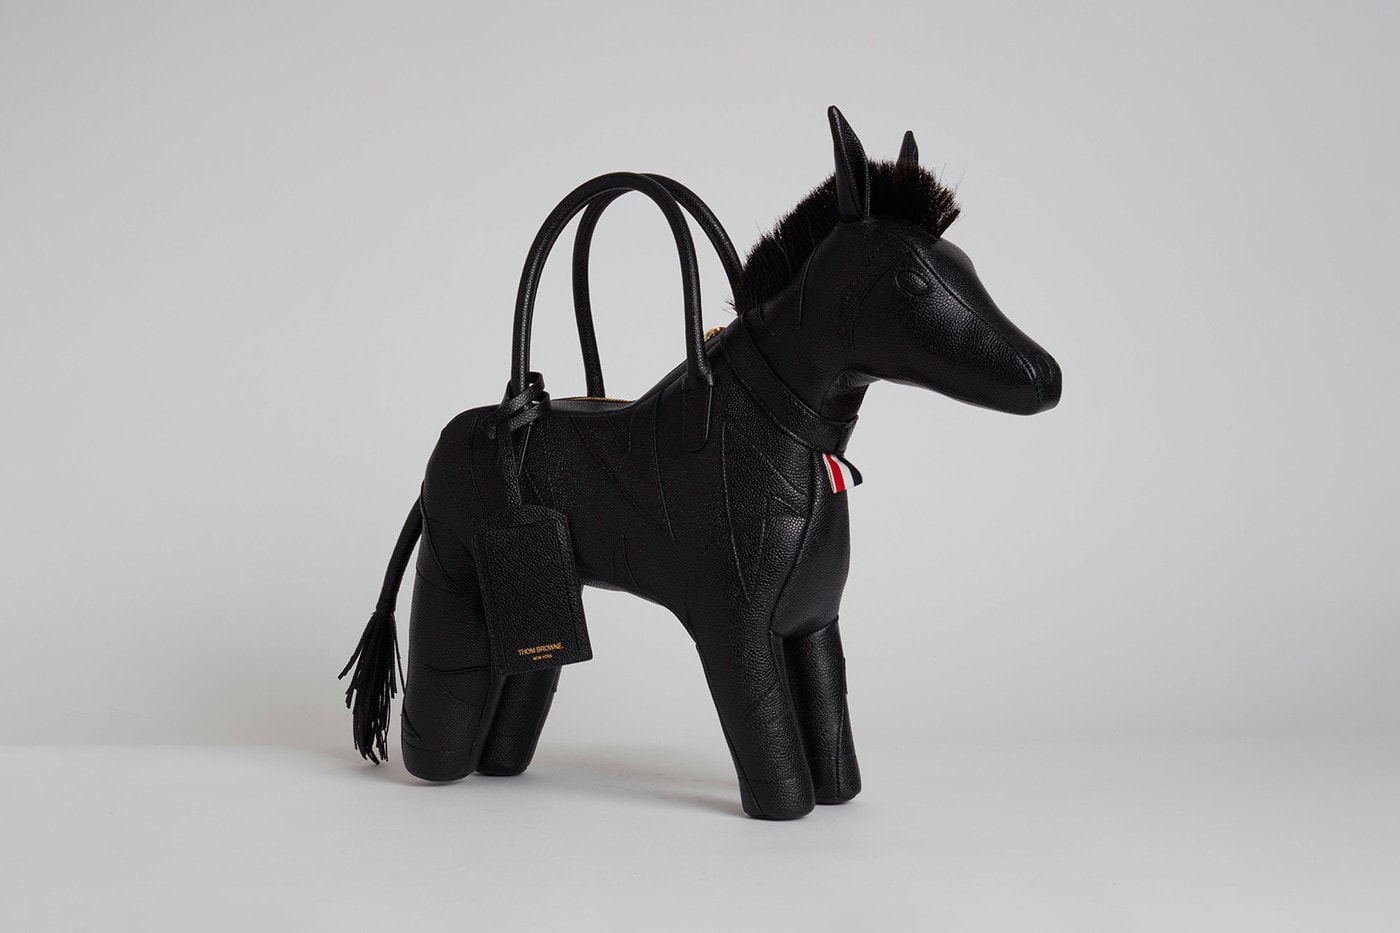 thom browne animal bag collection release 2020